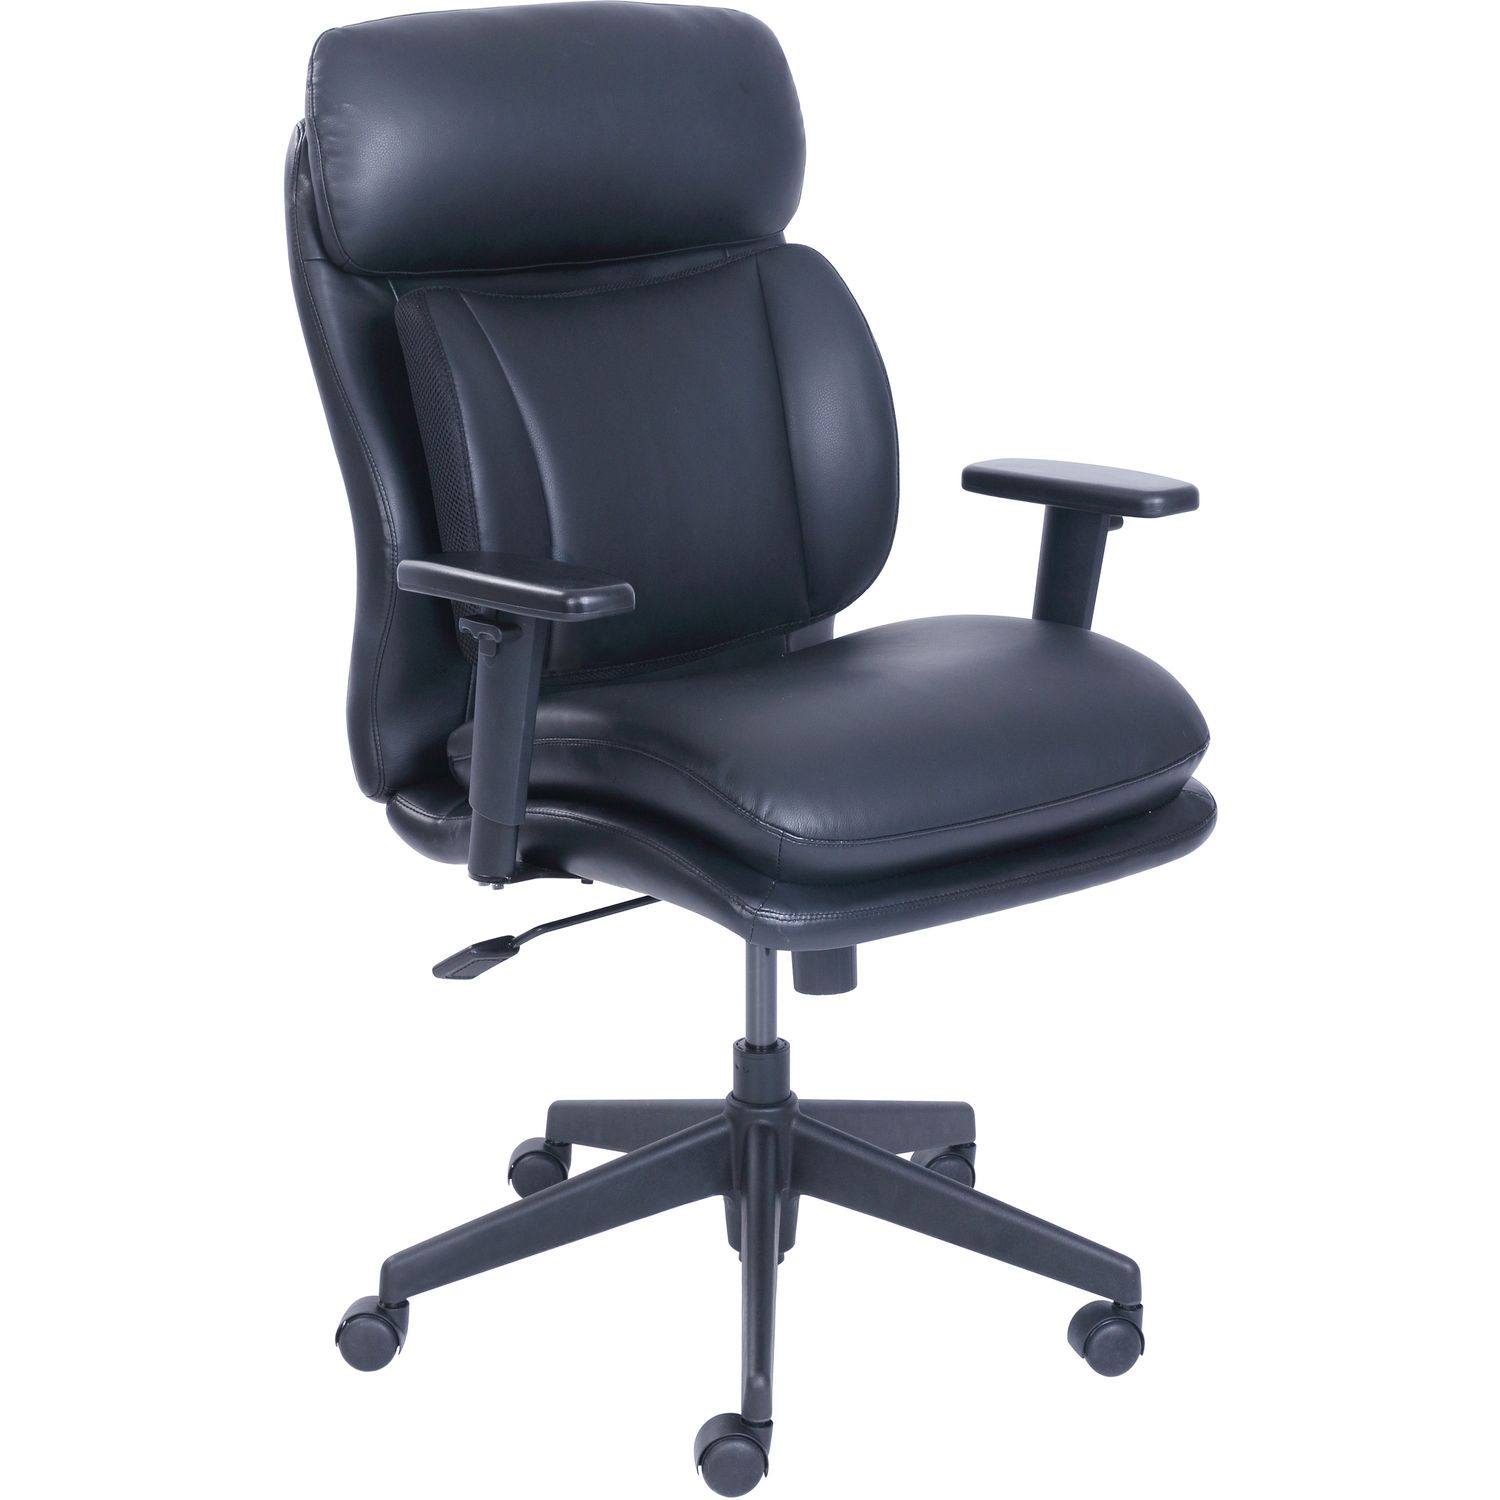 InCite Task Chair Black Bonded Leather Seat, Black Bonded Leather Back, 5-star Base, 1 Each